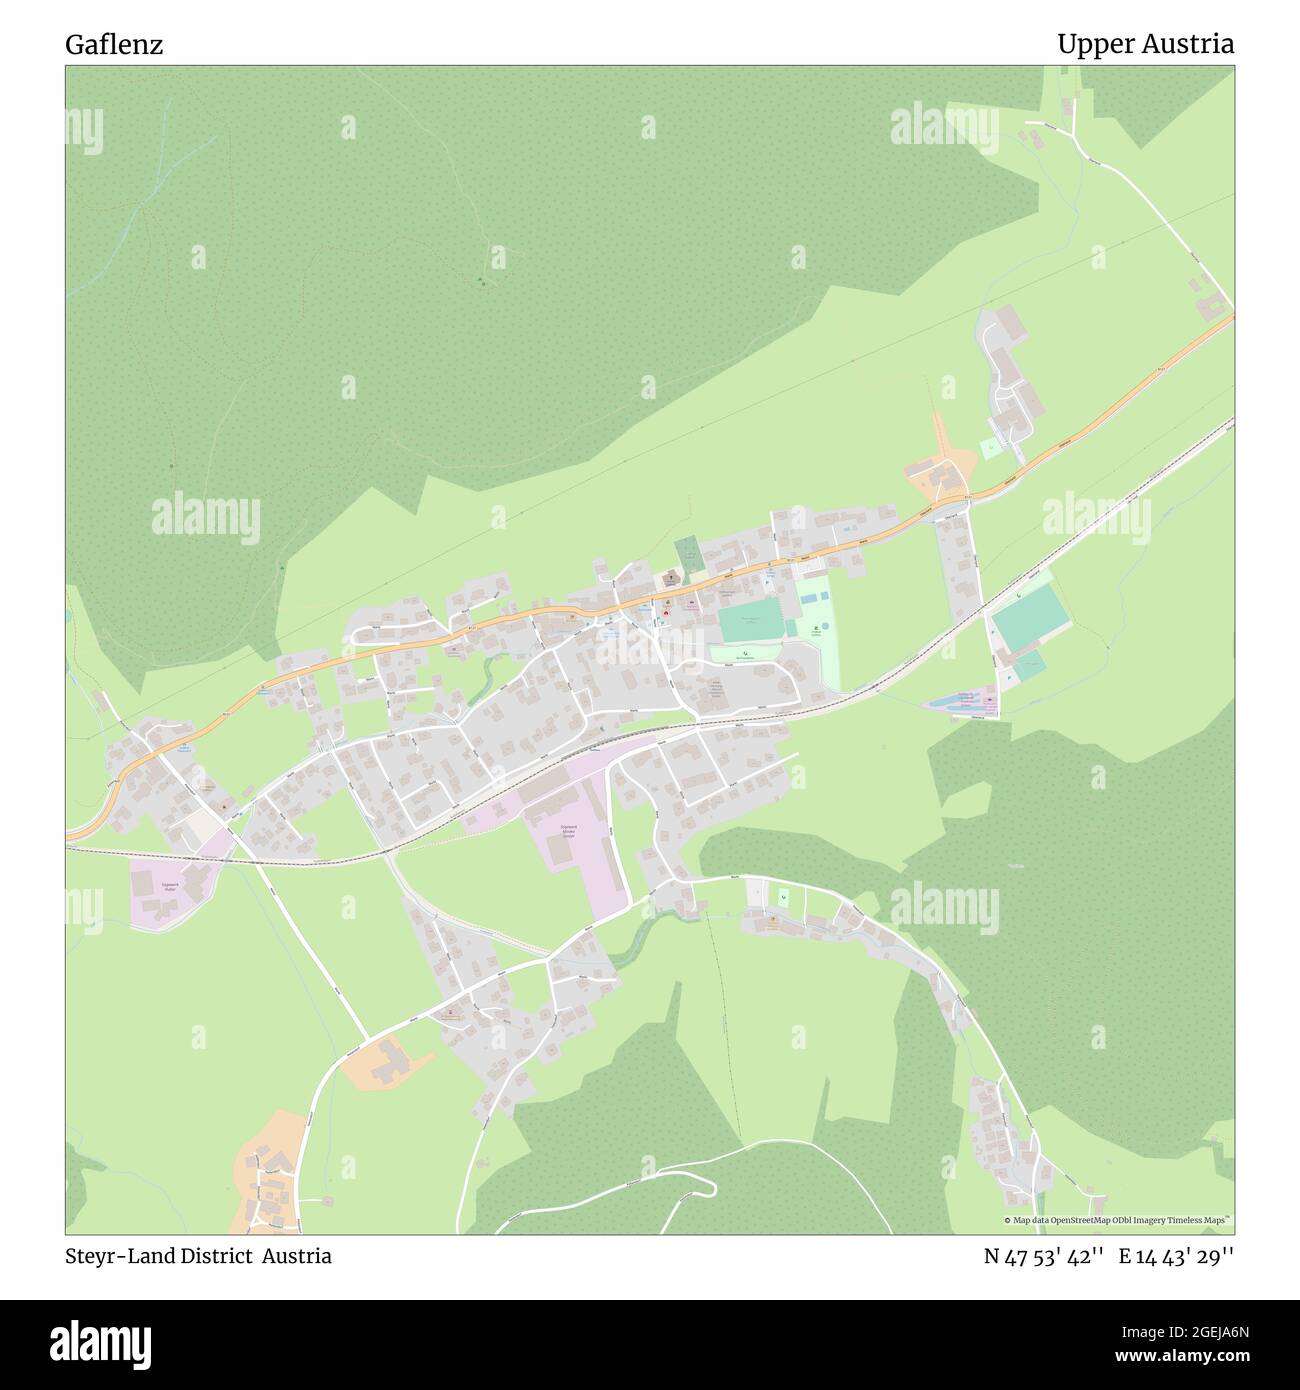 Gaflenz, Steyr-Land District, Austria, Upper Austria, N 47 53' 42'', E 14 43' 29'', map, Timeless Map published in 2021. Travelers, explorers and adventurers like Florence Nightingale, David Livingstone, Ernest Shackleton, Lewis and Clark and Sherlock Holmes relied on maps to plan travels to the world's most remote corners, Timeless Maps is mapping most locations on the globe, showing the achievement of great dreams Stock Photo